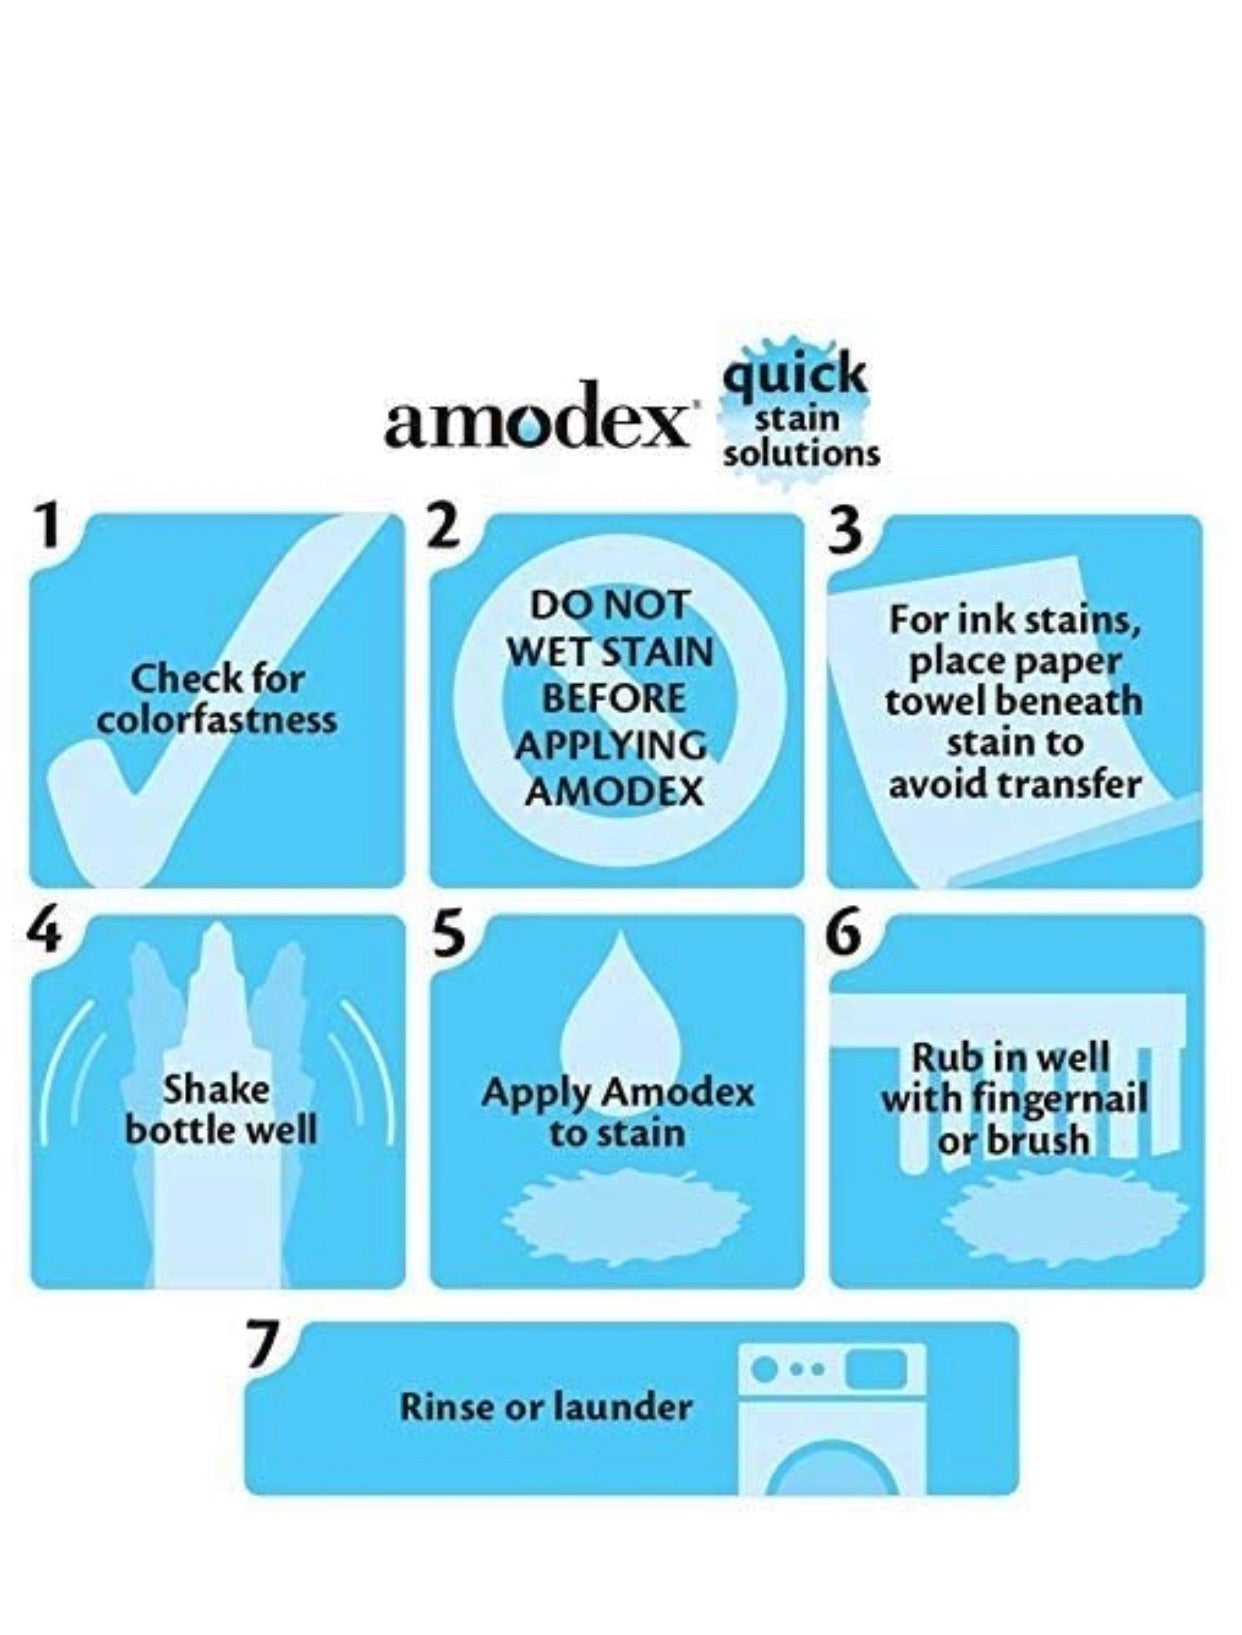 Amodex Ink and Stain Remover – Cleans Marker, Ink, Crayon, Pen, Makeup from Furniture, Skin, Clothing, Fabric, Leather - 30 ml